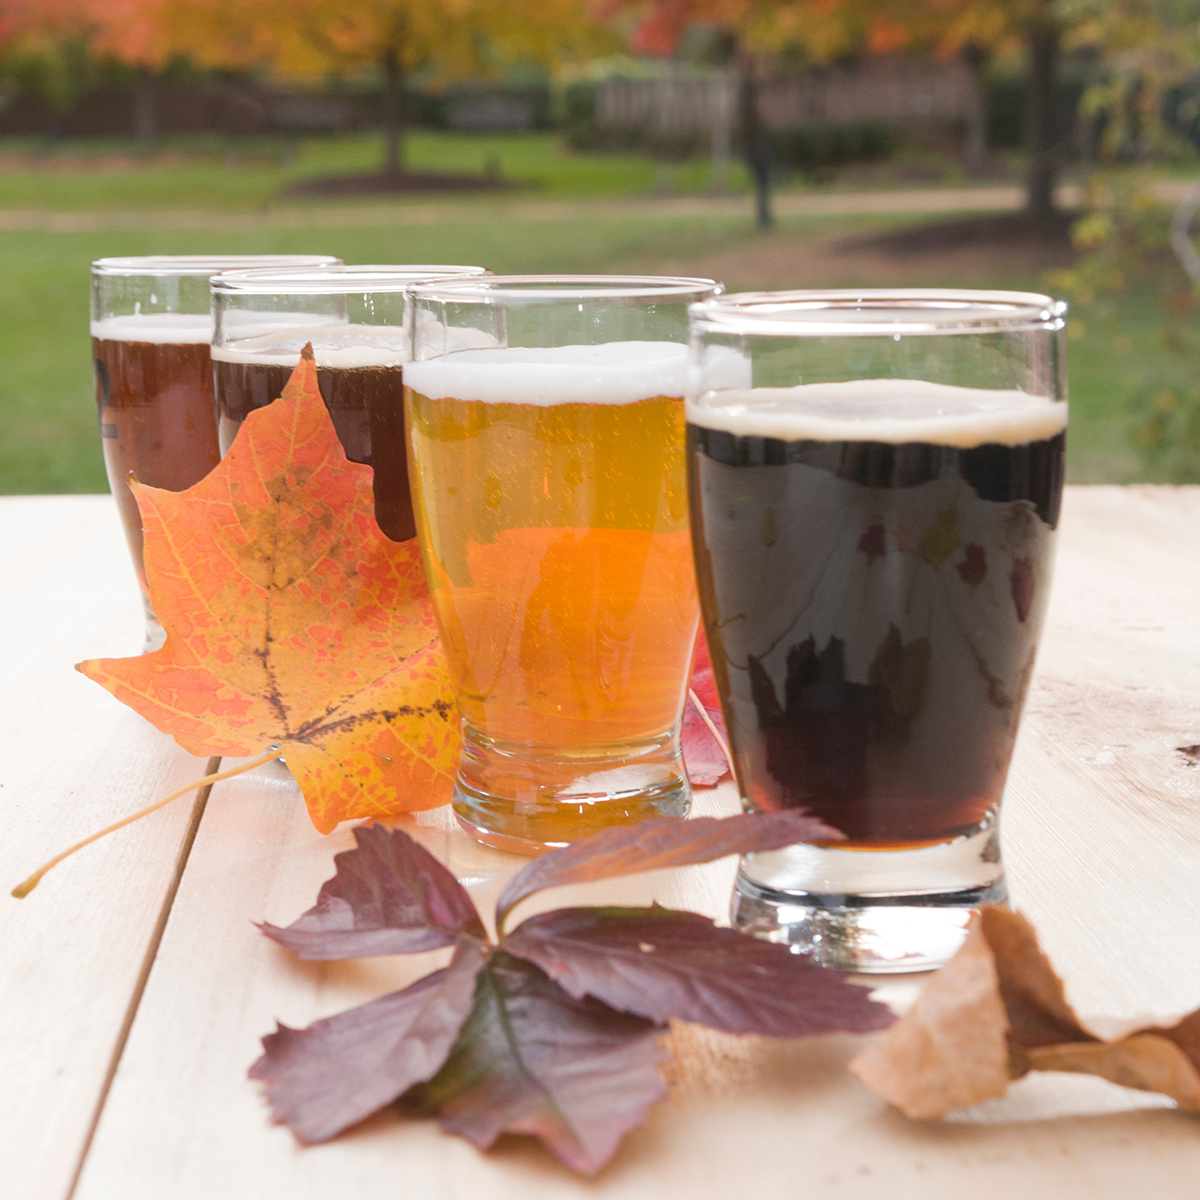 Pair your fall food with beer